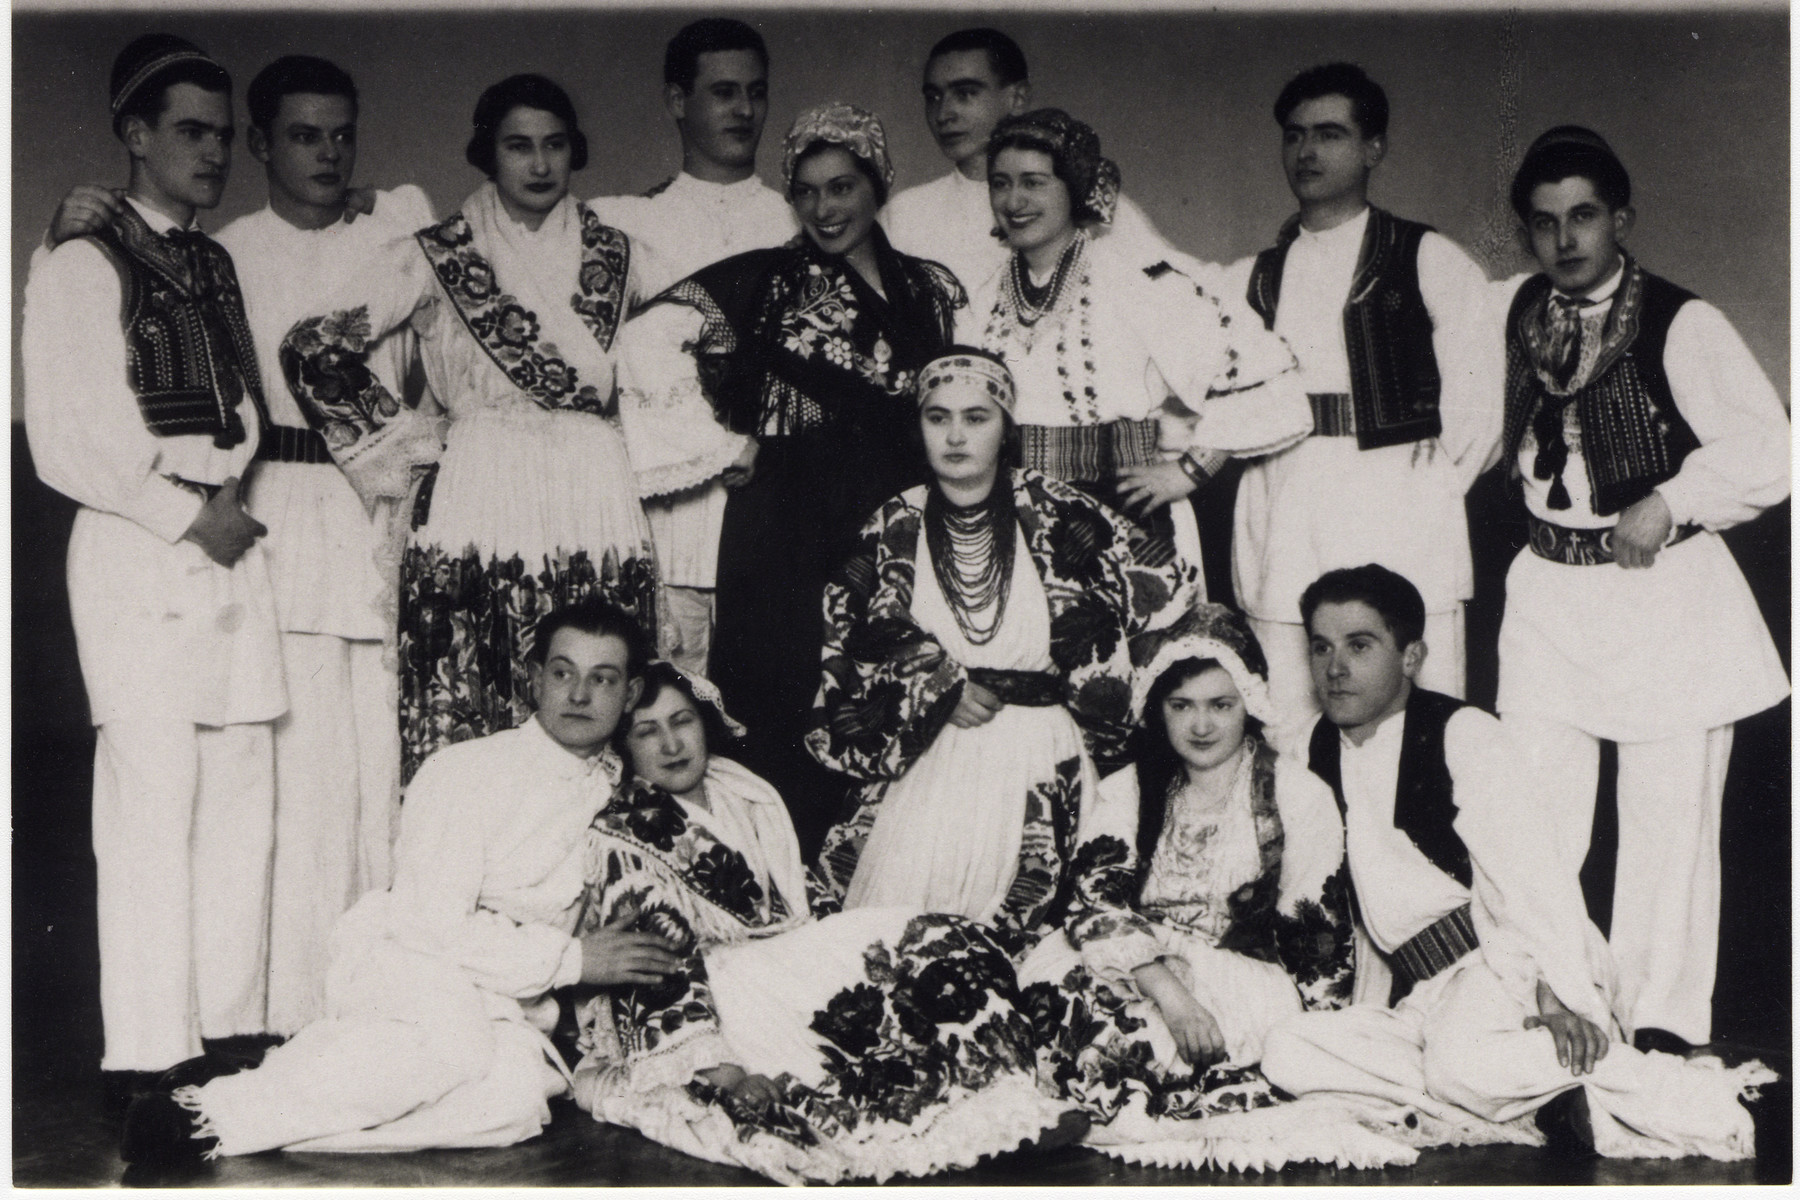 The Yugoslav team at the Maccabi games in Palestine poses in traditional folk costumes.

Andor Willer, a member of the fencing team, stands on the far right.